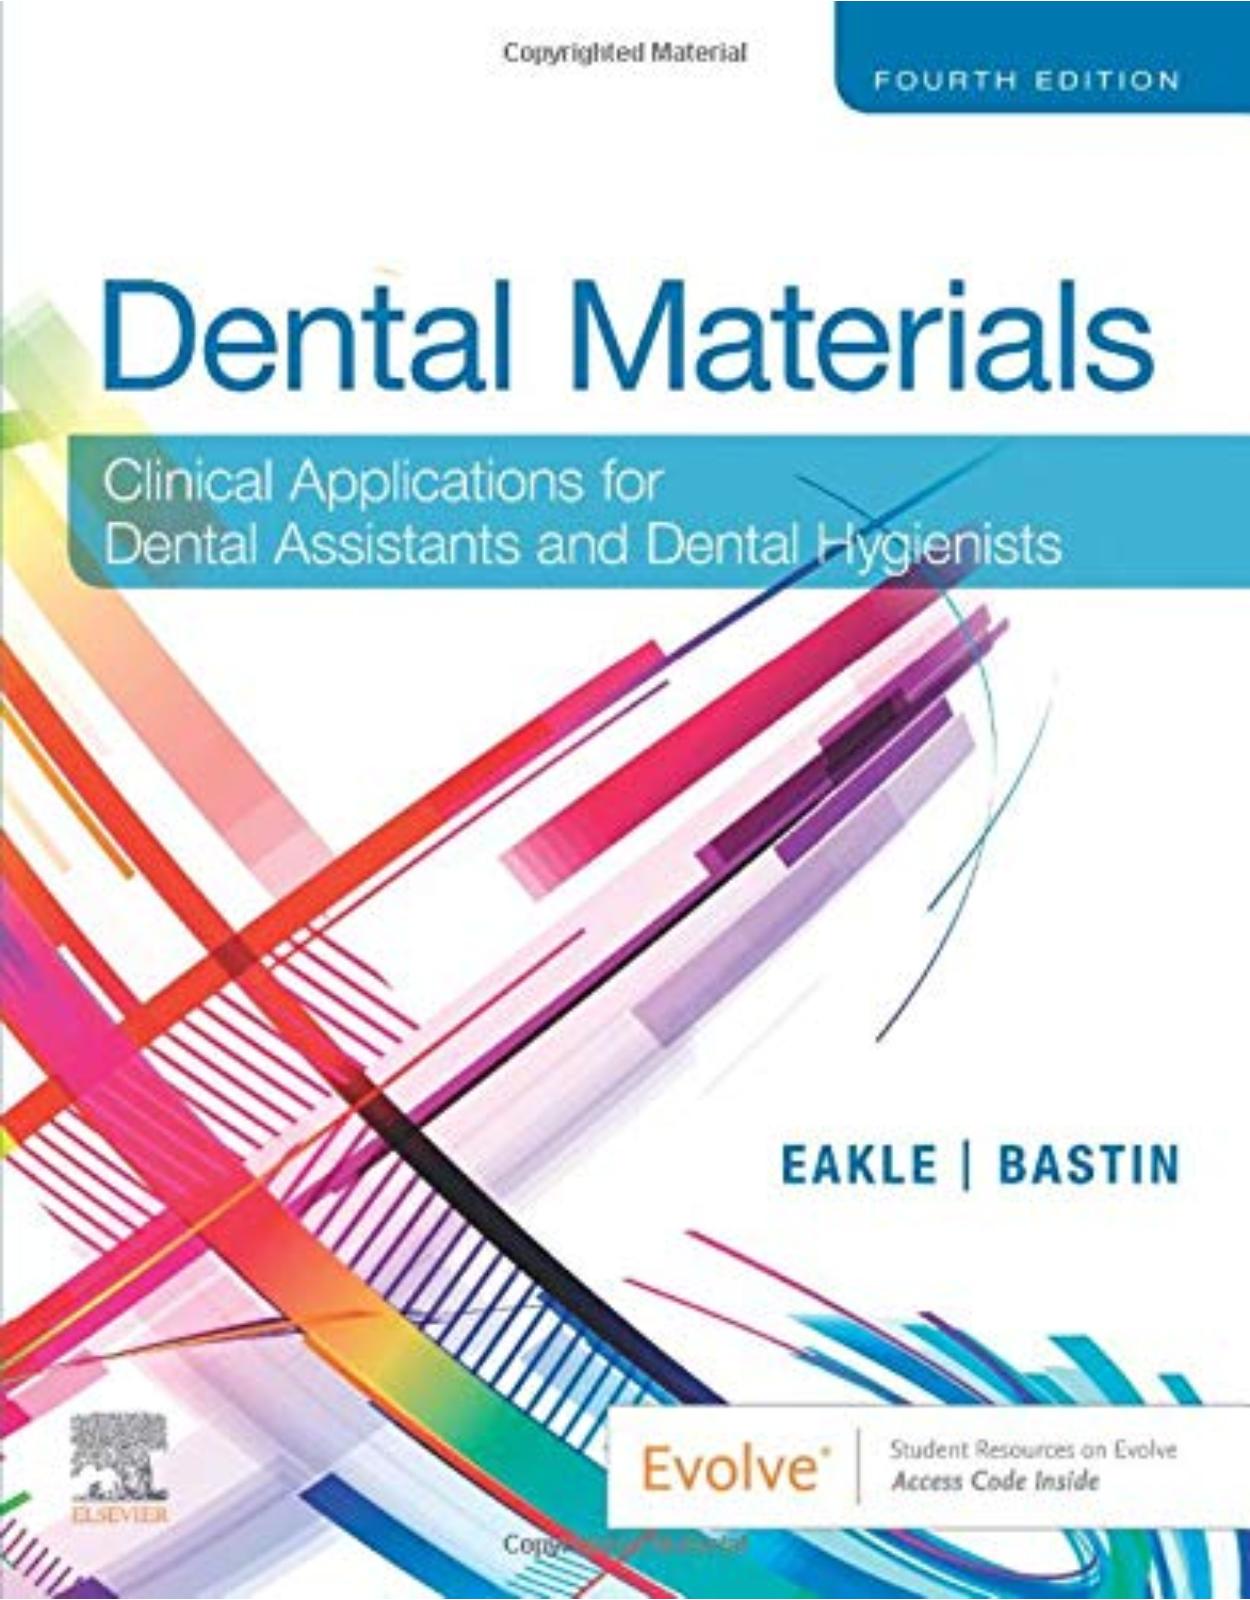 Dental Materials: Clinical Applications for Dental Assistants and Dental Hygienists 